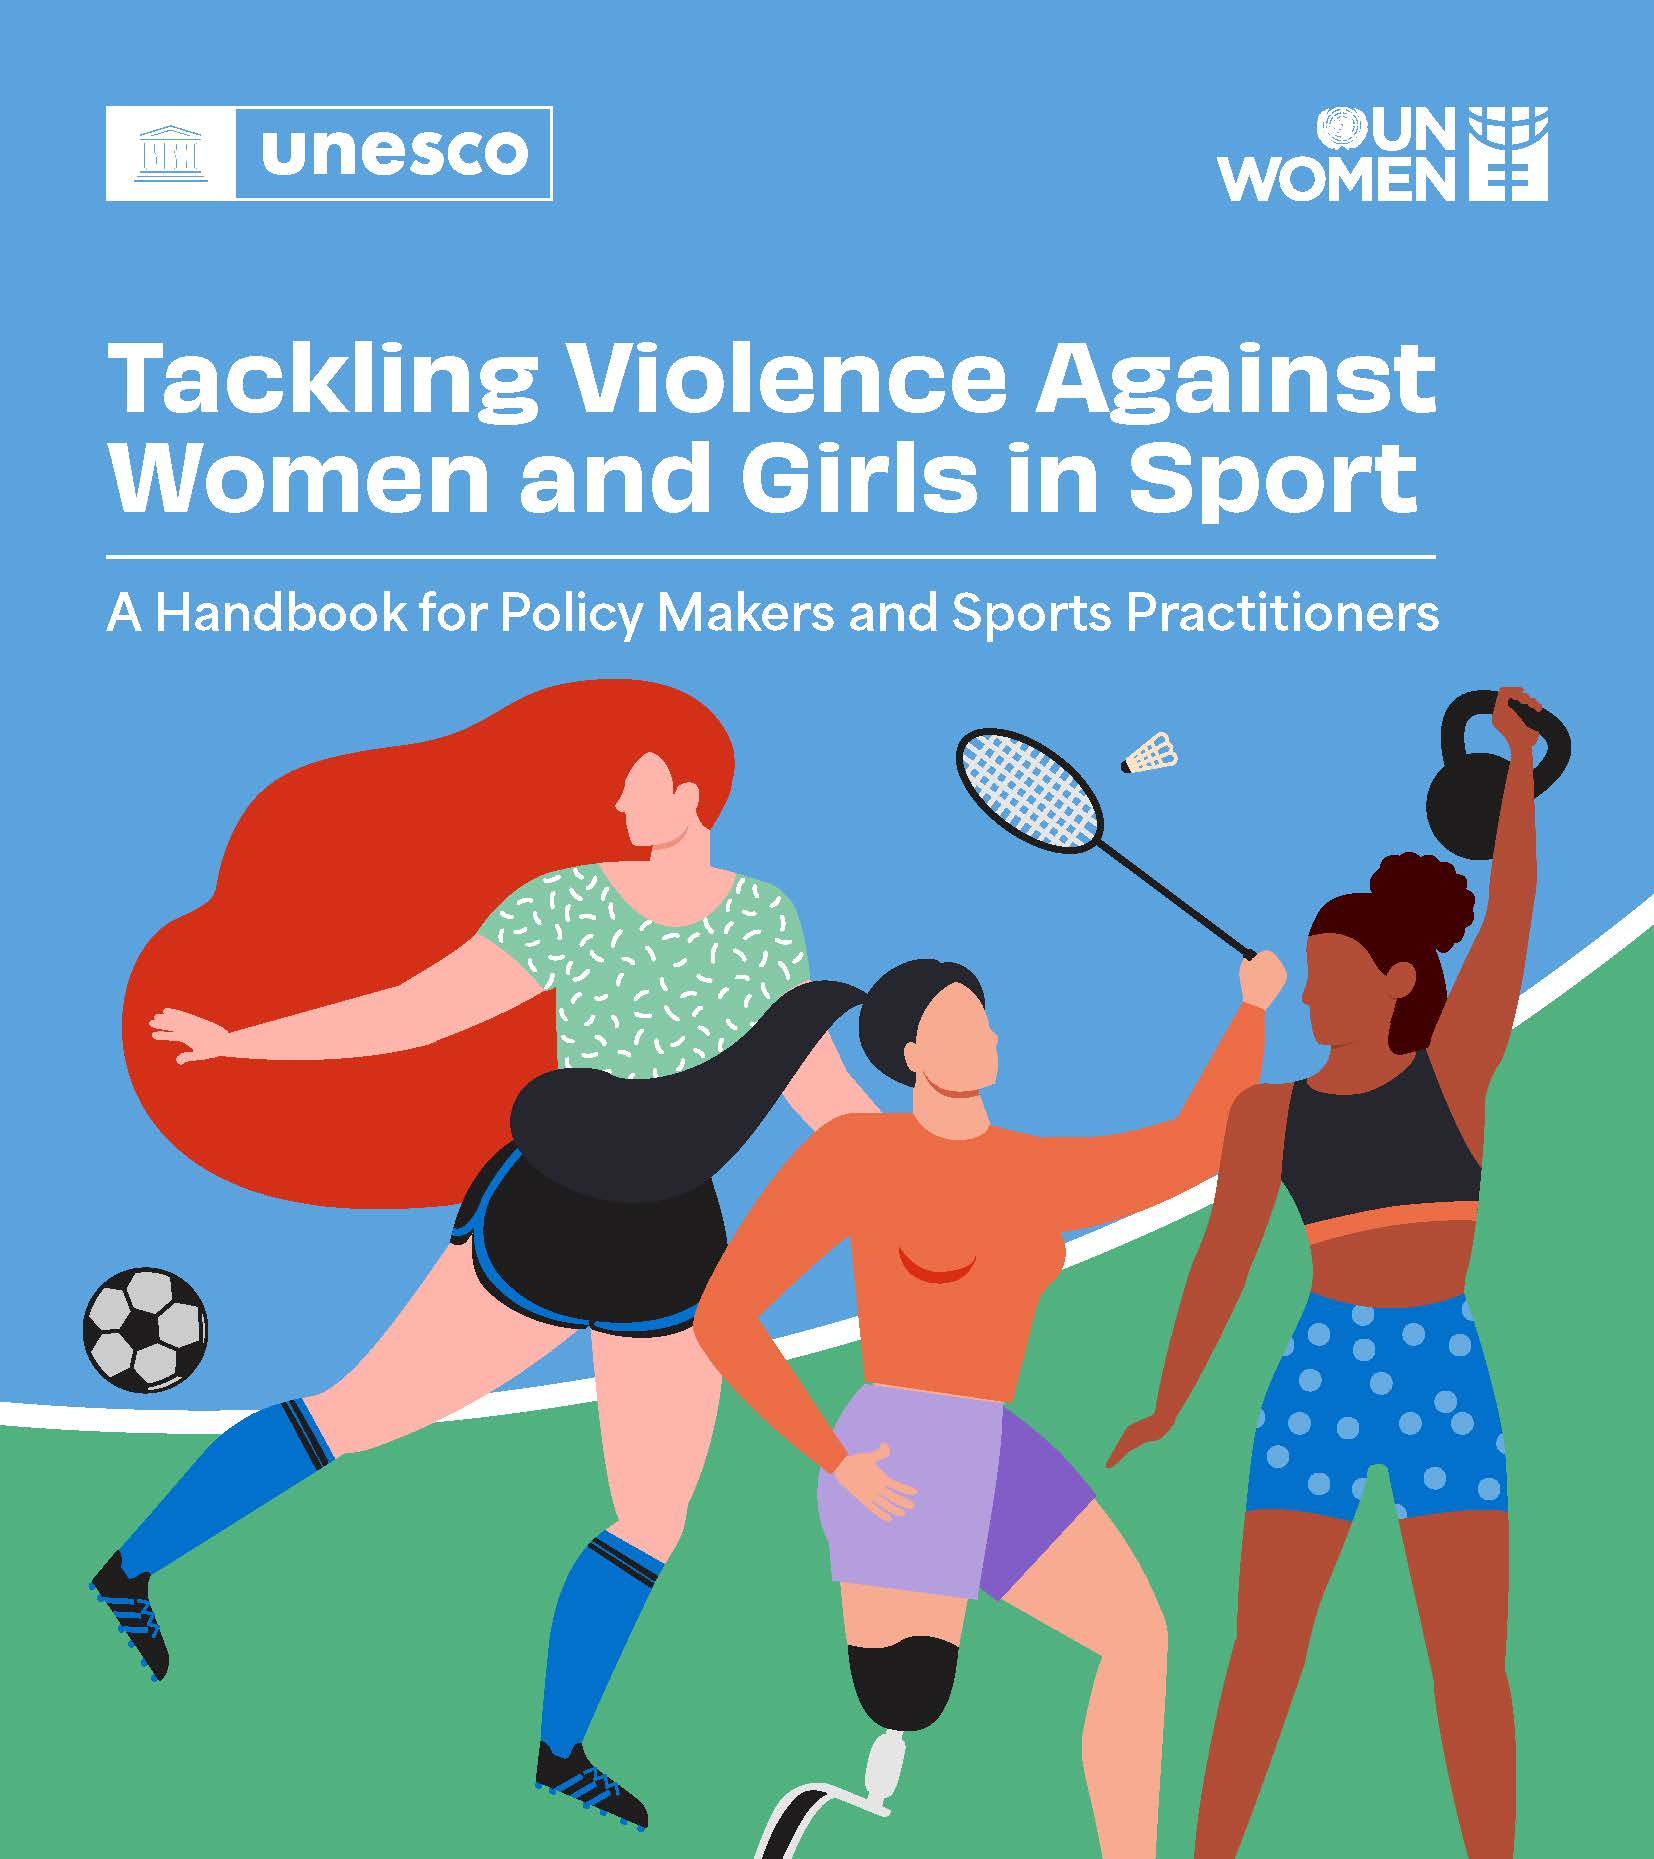 ackling Violence Against Women and Girls in Sport: A Handbook for Policy Makers and Sports Practitioners